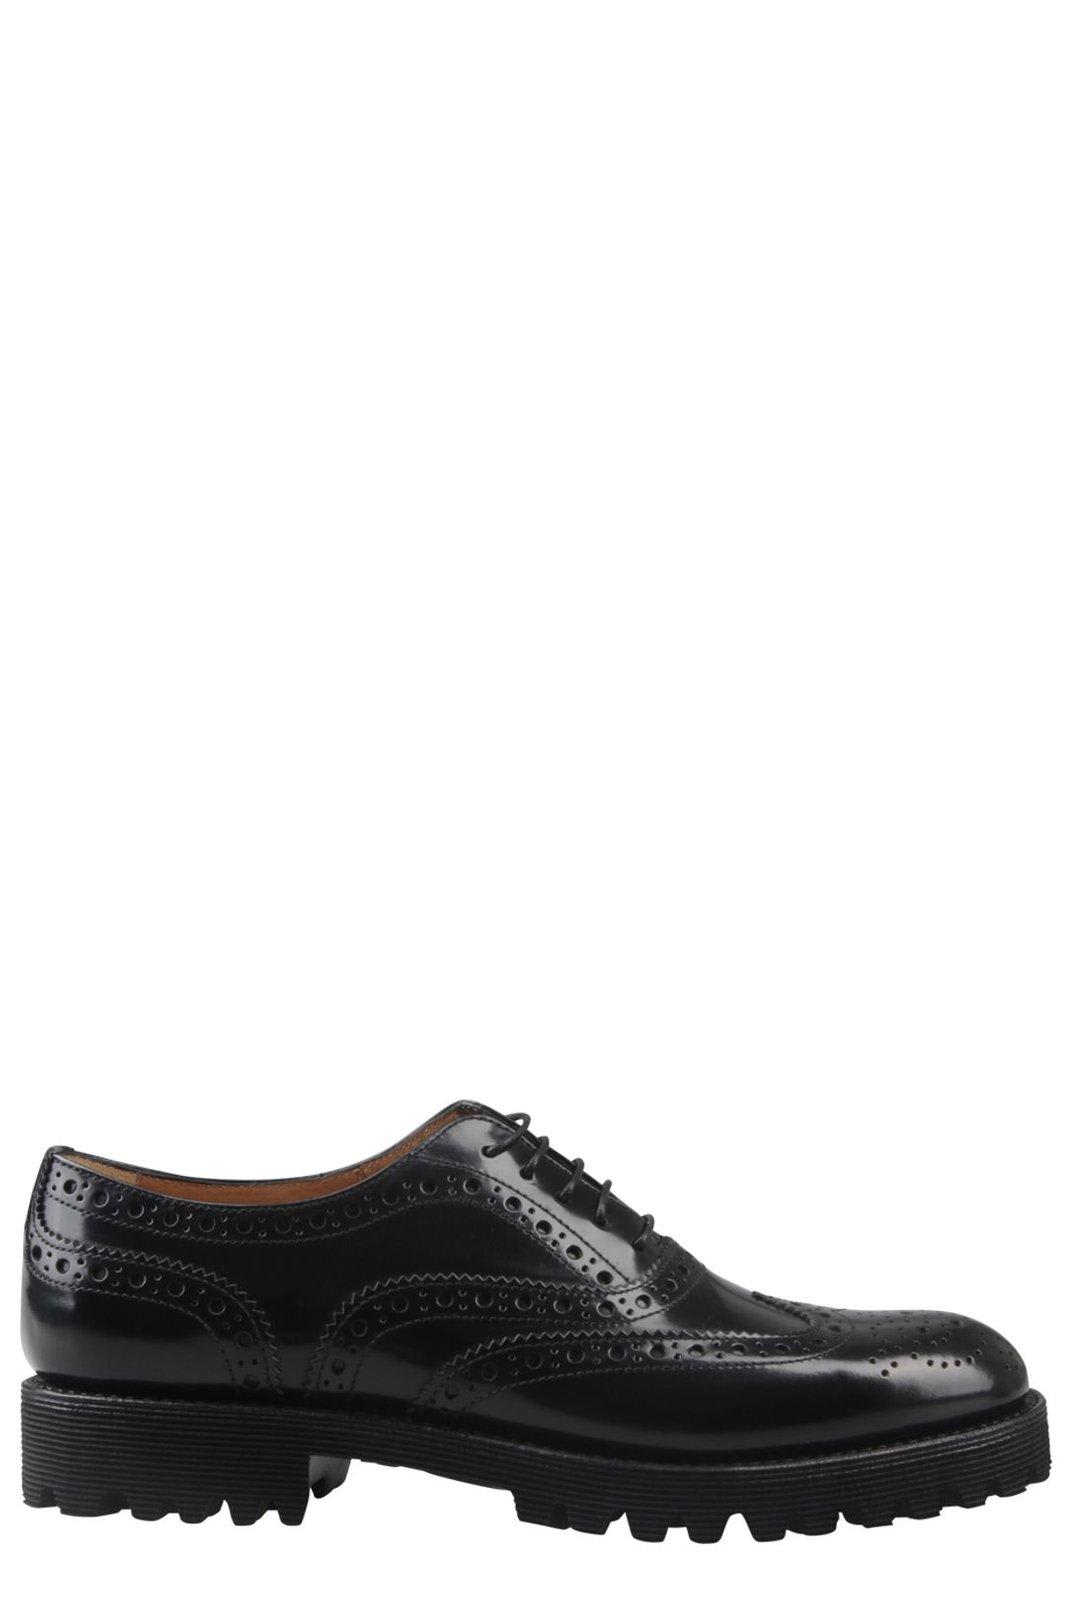 CHURCH'S LACE-UP DERBY SHOES